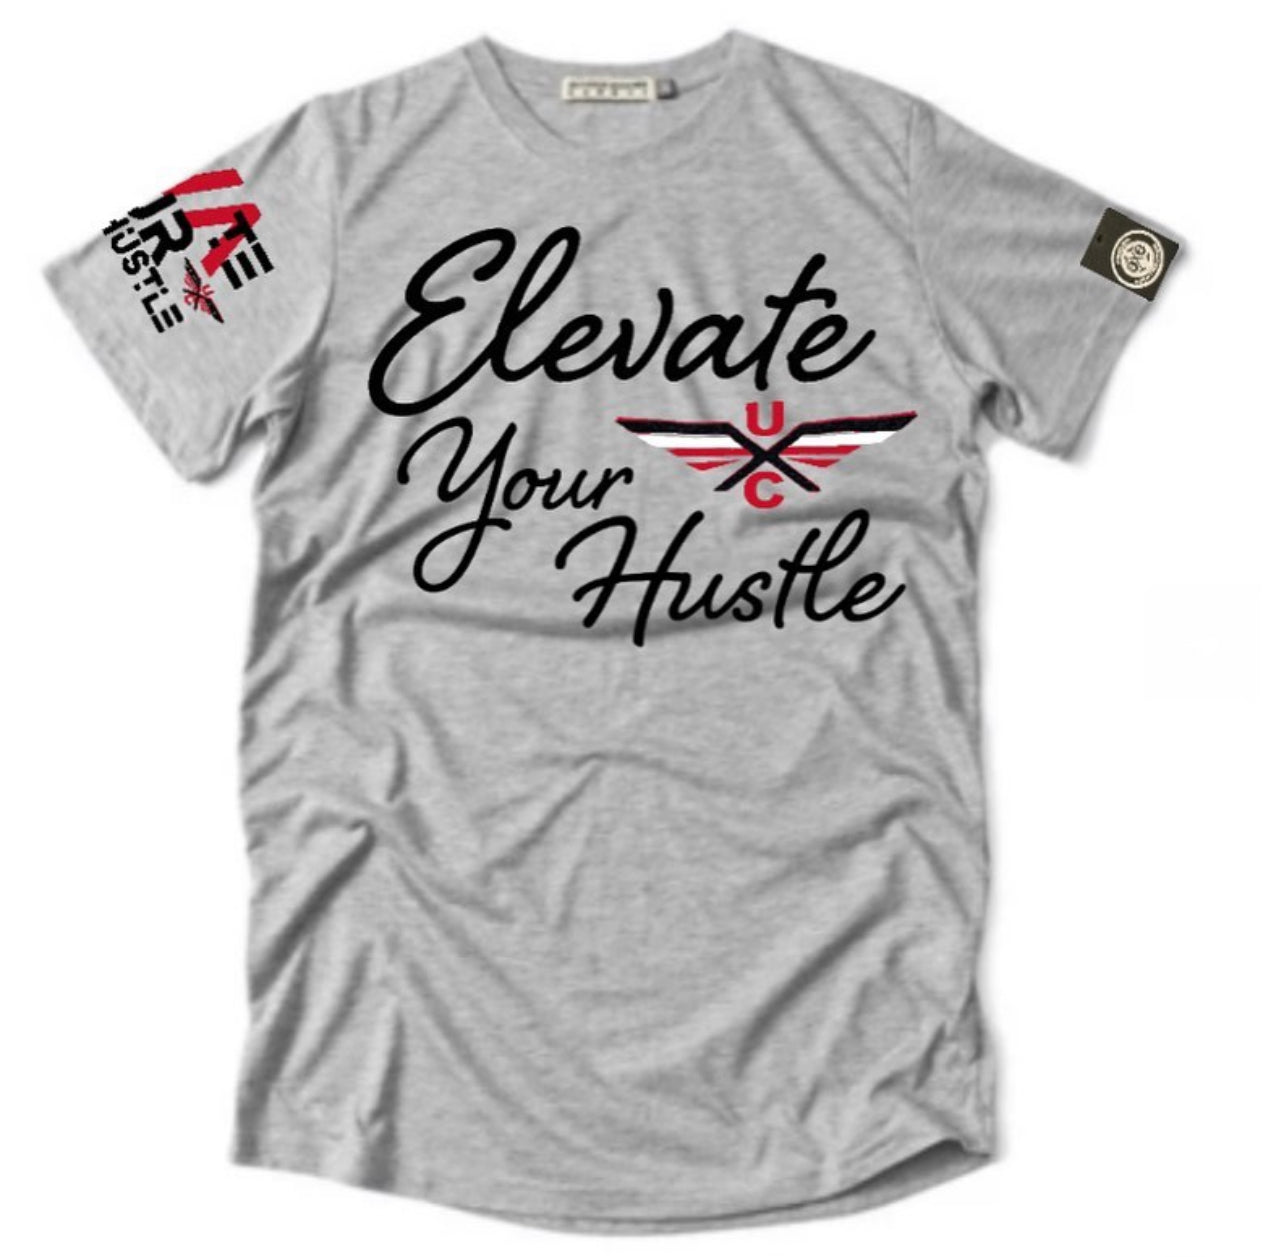 UC - Elevate Your Hustle